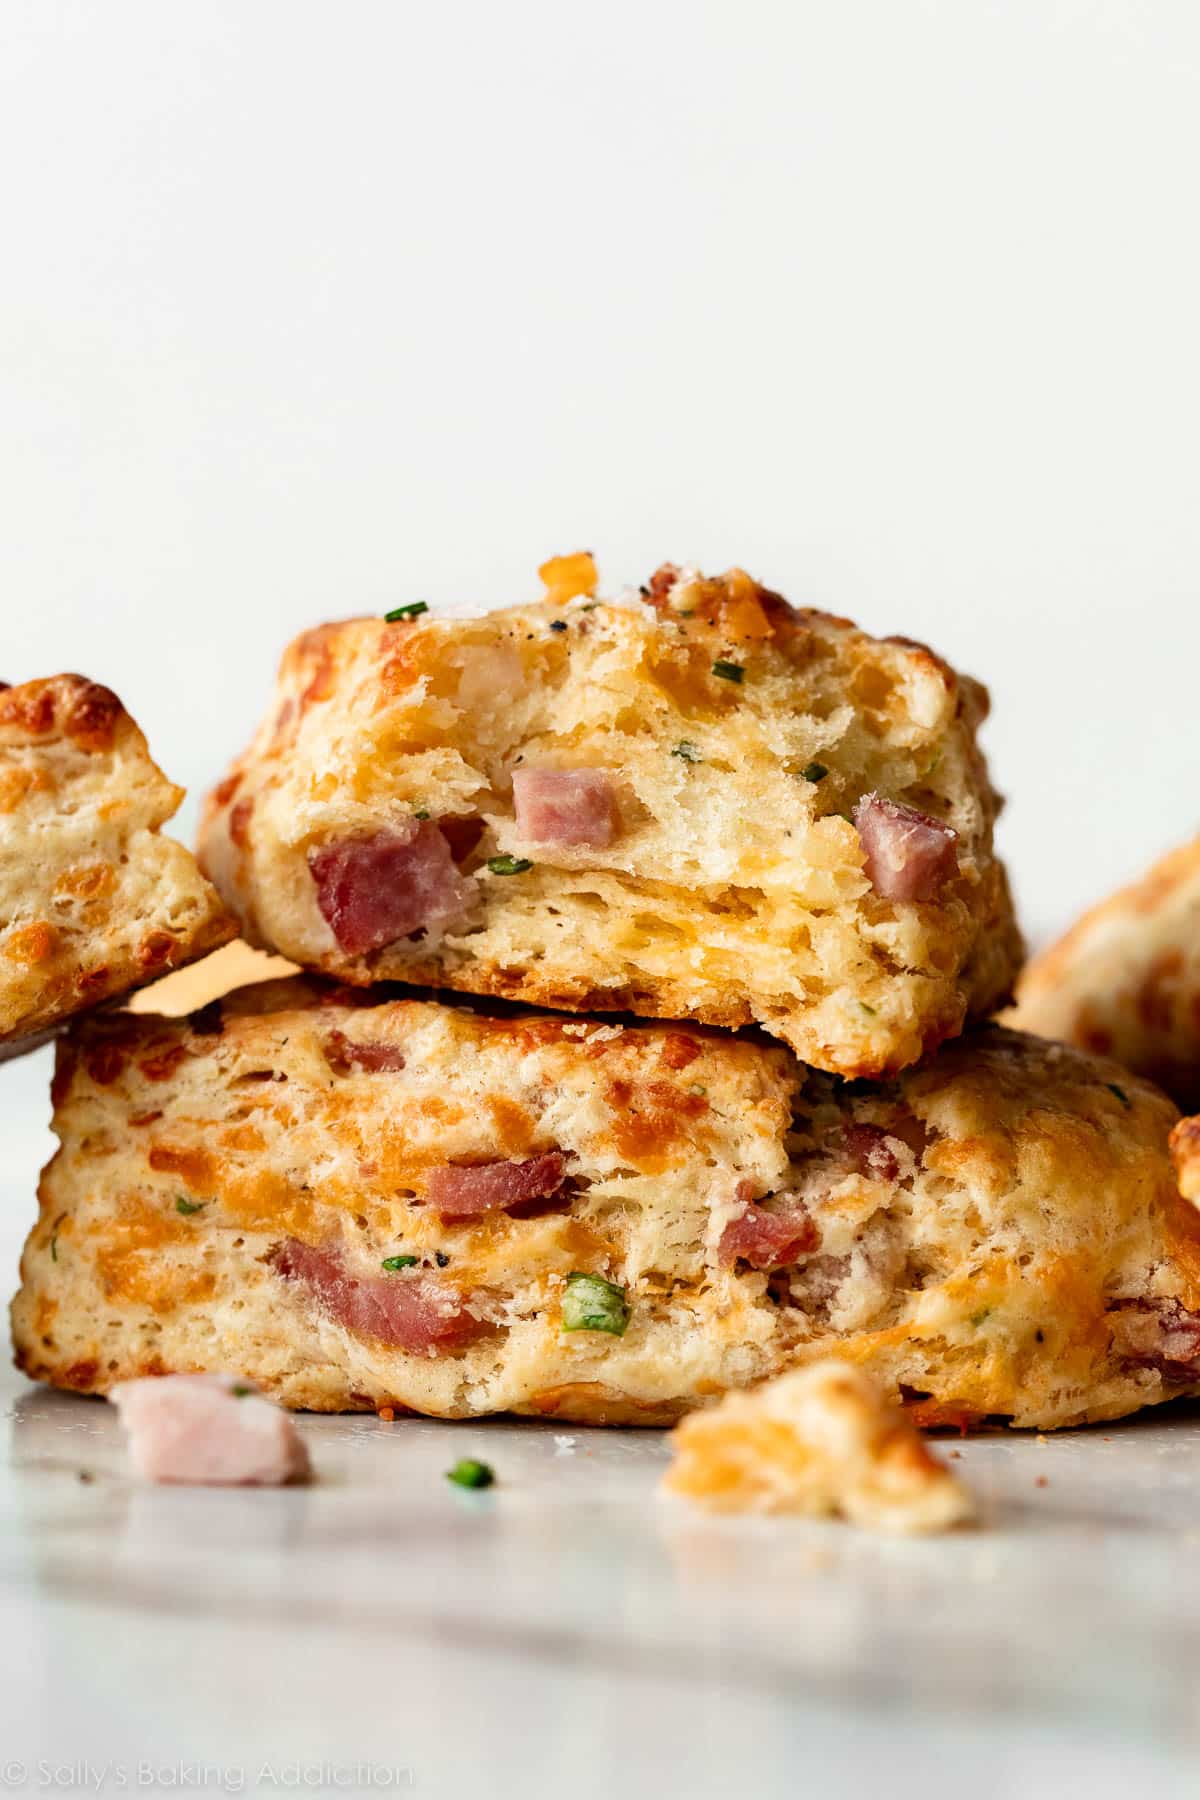 cheddar cheese ham scone torn in half to reveal flaky center.